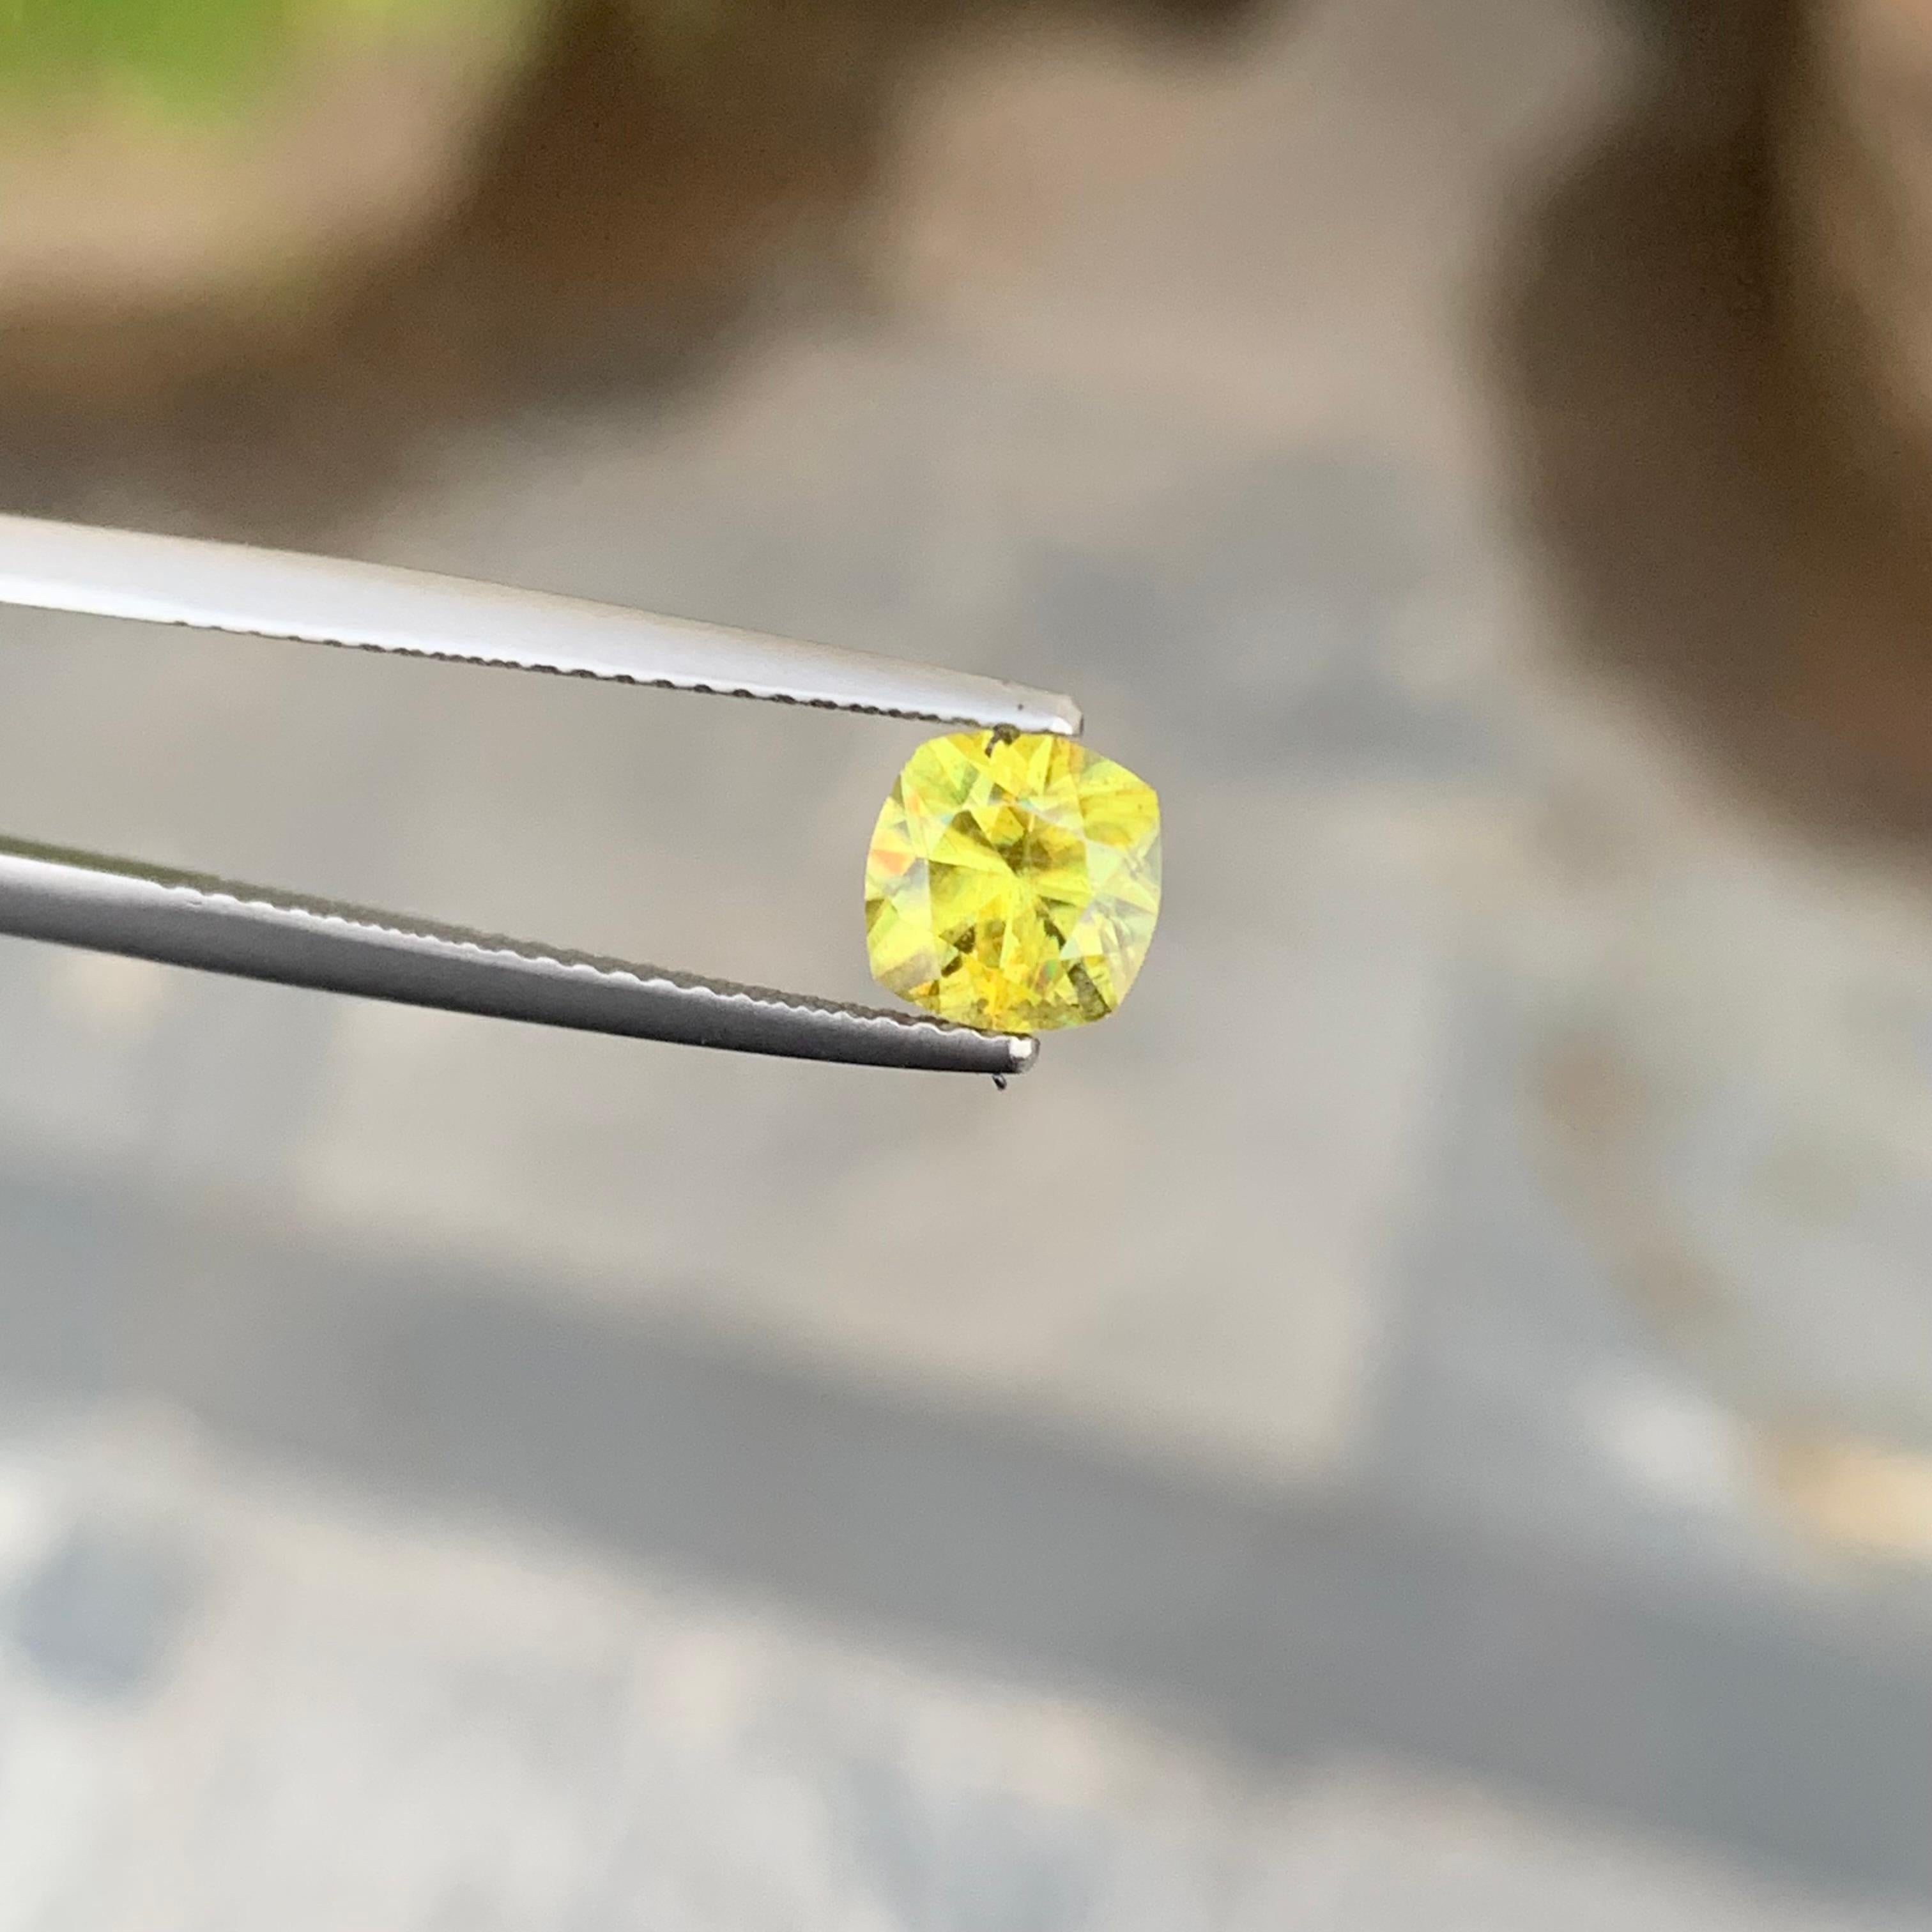 Faceted Sphene
Weight: 0.90 Carats
Dimension: 6x5.9x4 Mm
Shape: Cushion
Treatment: Non
Certificate: On Demand
.
Sphene is a very rare calcium titanium silicate that is hardly ever seen in jewelry or collections. Sphene is also called